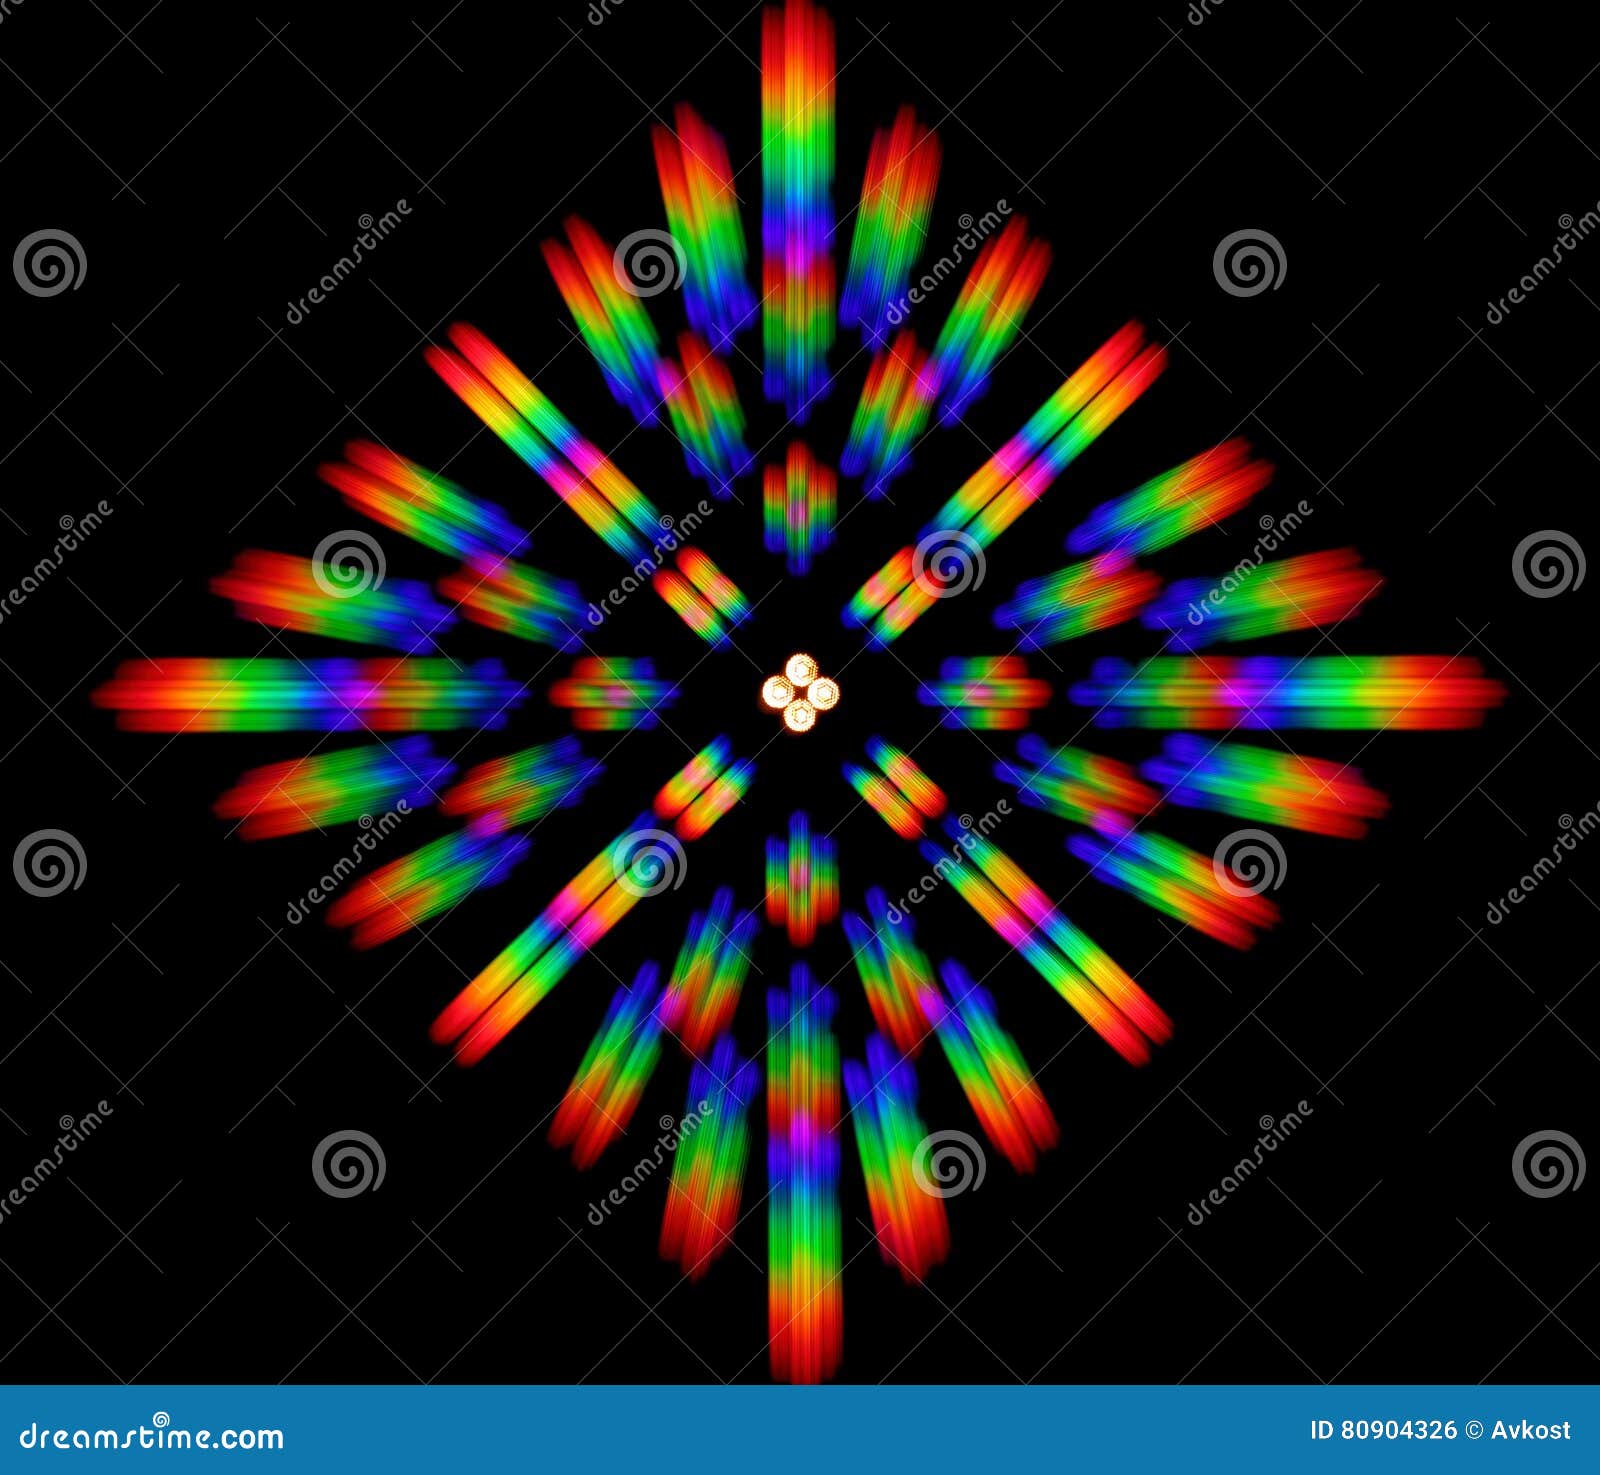 Photo of the Diffraction Pattern of LED Array Light, Comprising a ...